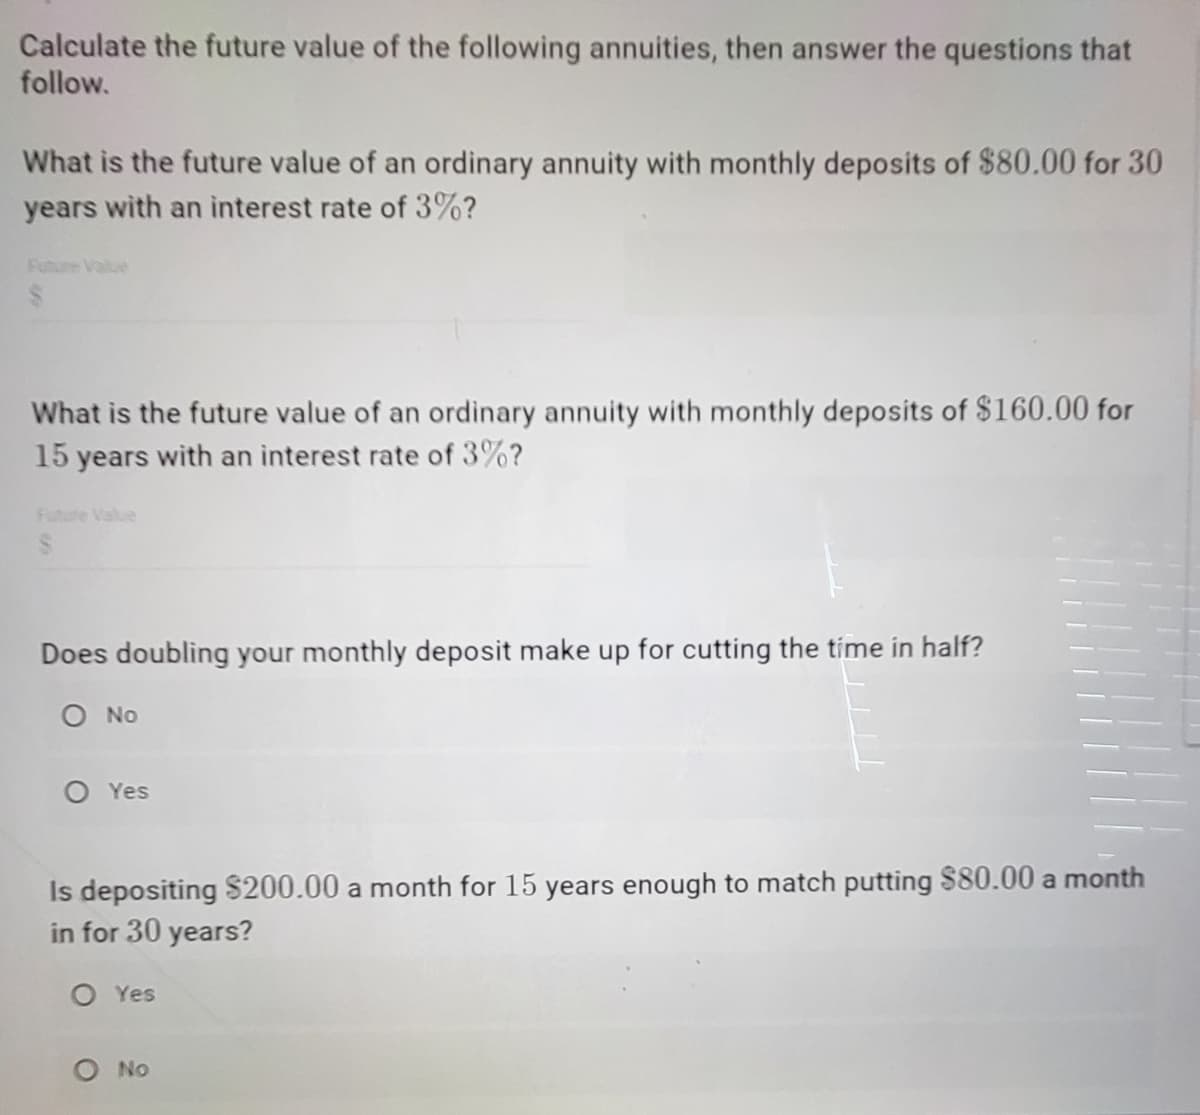 Calculate the future value of the following annuities, then answer the questions that
follow.
What is the future value of an ordinary annuity with monthly deposits of $80.00 for 30
years with an interest rate of 3%?
Future Value
What is the future value of an ordinary annuity with monthly deposits of $160.00 for
15 years with an interest rate of 3%?
Future Value
Does doubling your monthly deposit make up for cutting the time in half?
O No
O Yes
Is depositing $200.00 a month for 15 years enough to match putting $80.00 a month
in for 30 years?
O Yes
O No
